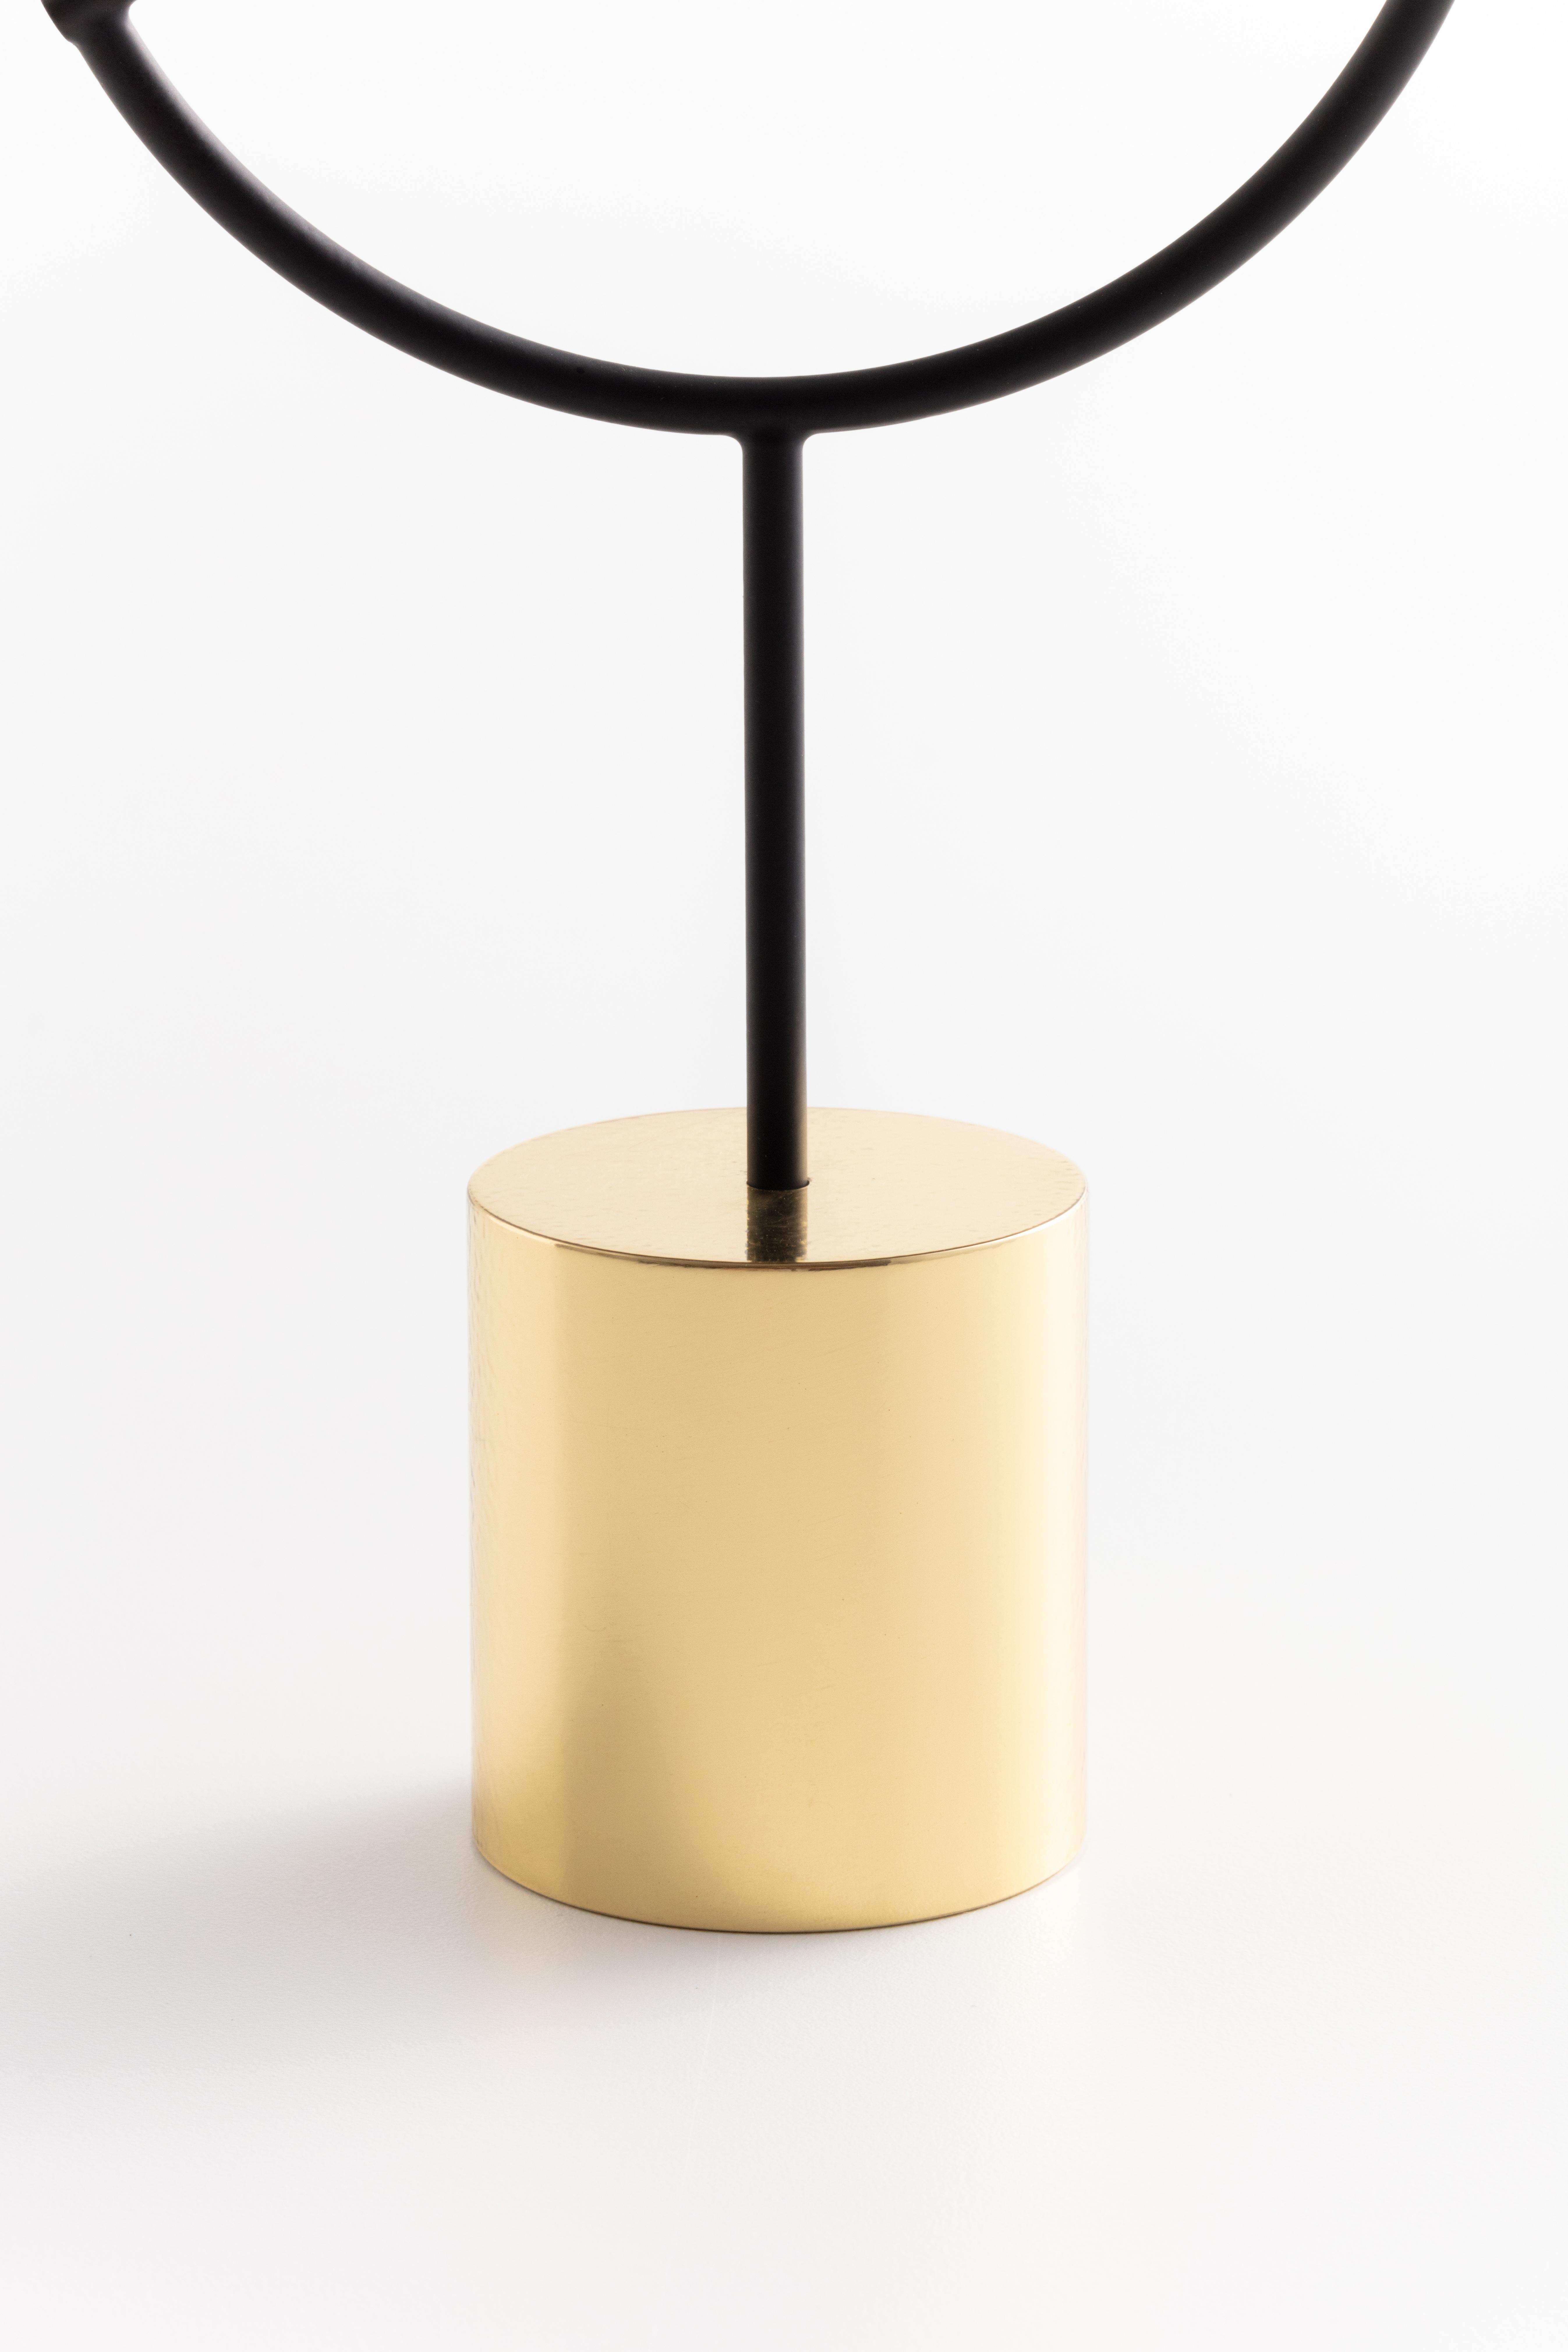 Contemporary Minimalist Golden / Black and Glass Solitary Vase V3 For Sale 3